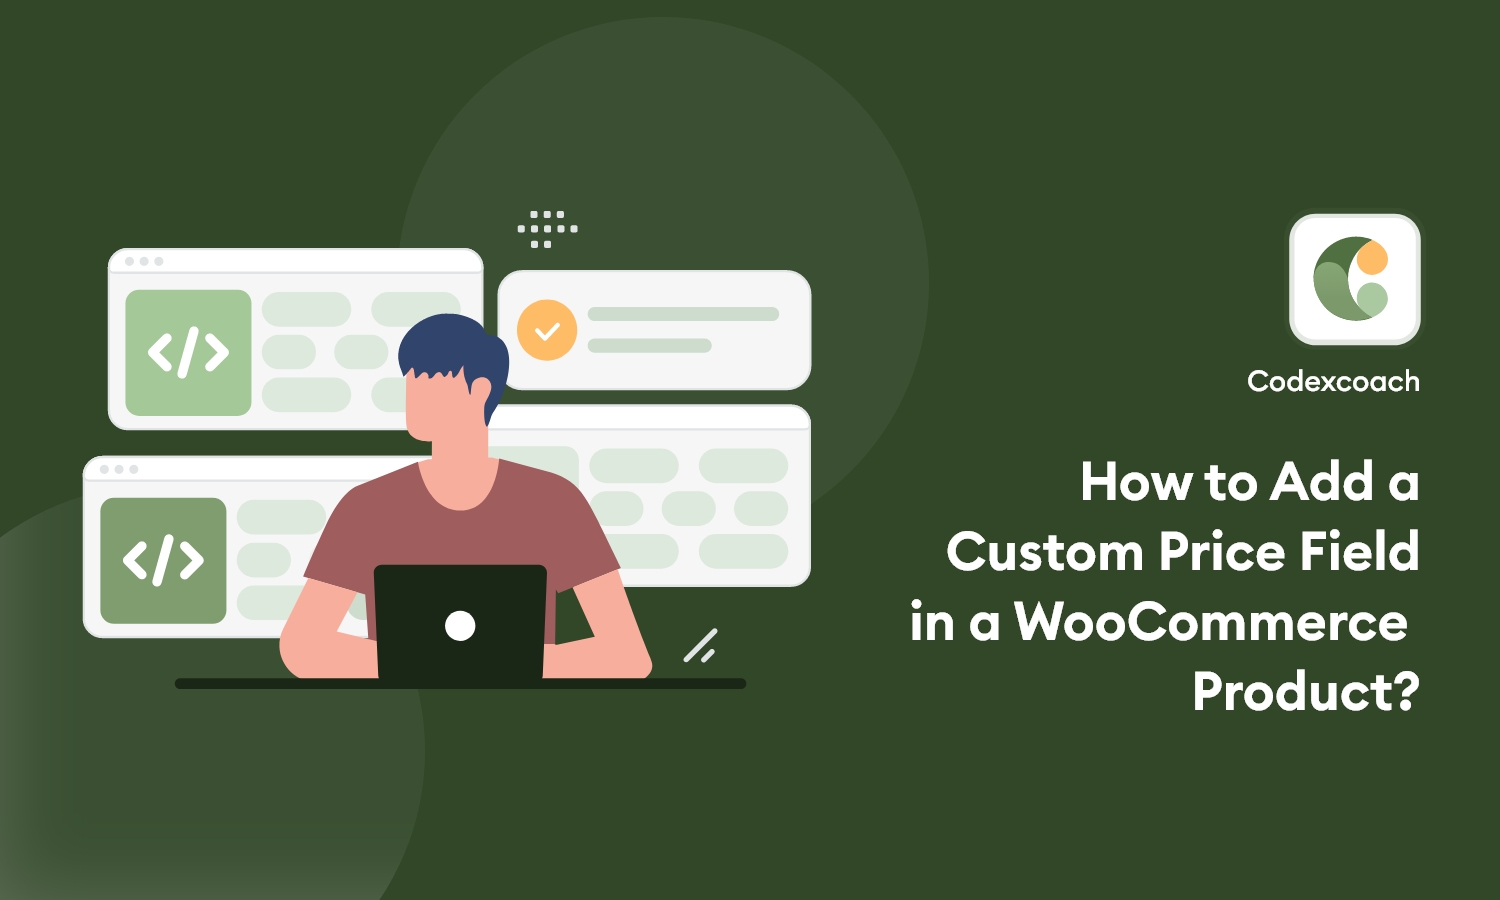 How to Add a Custom Price Field in a WooCommerce Product